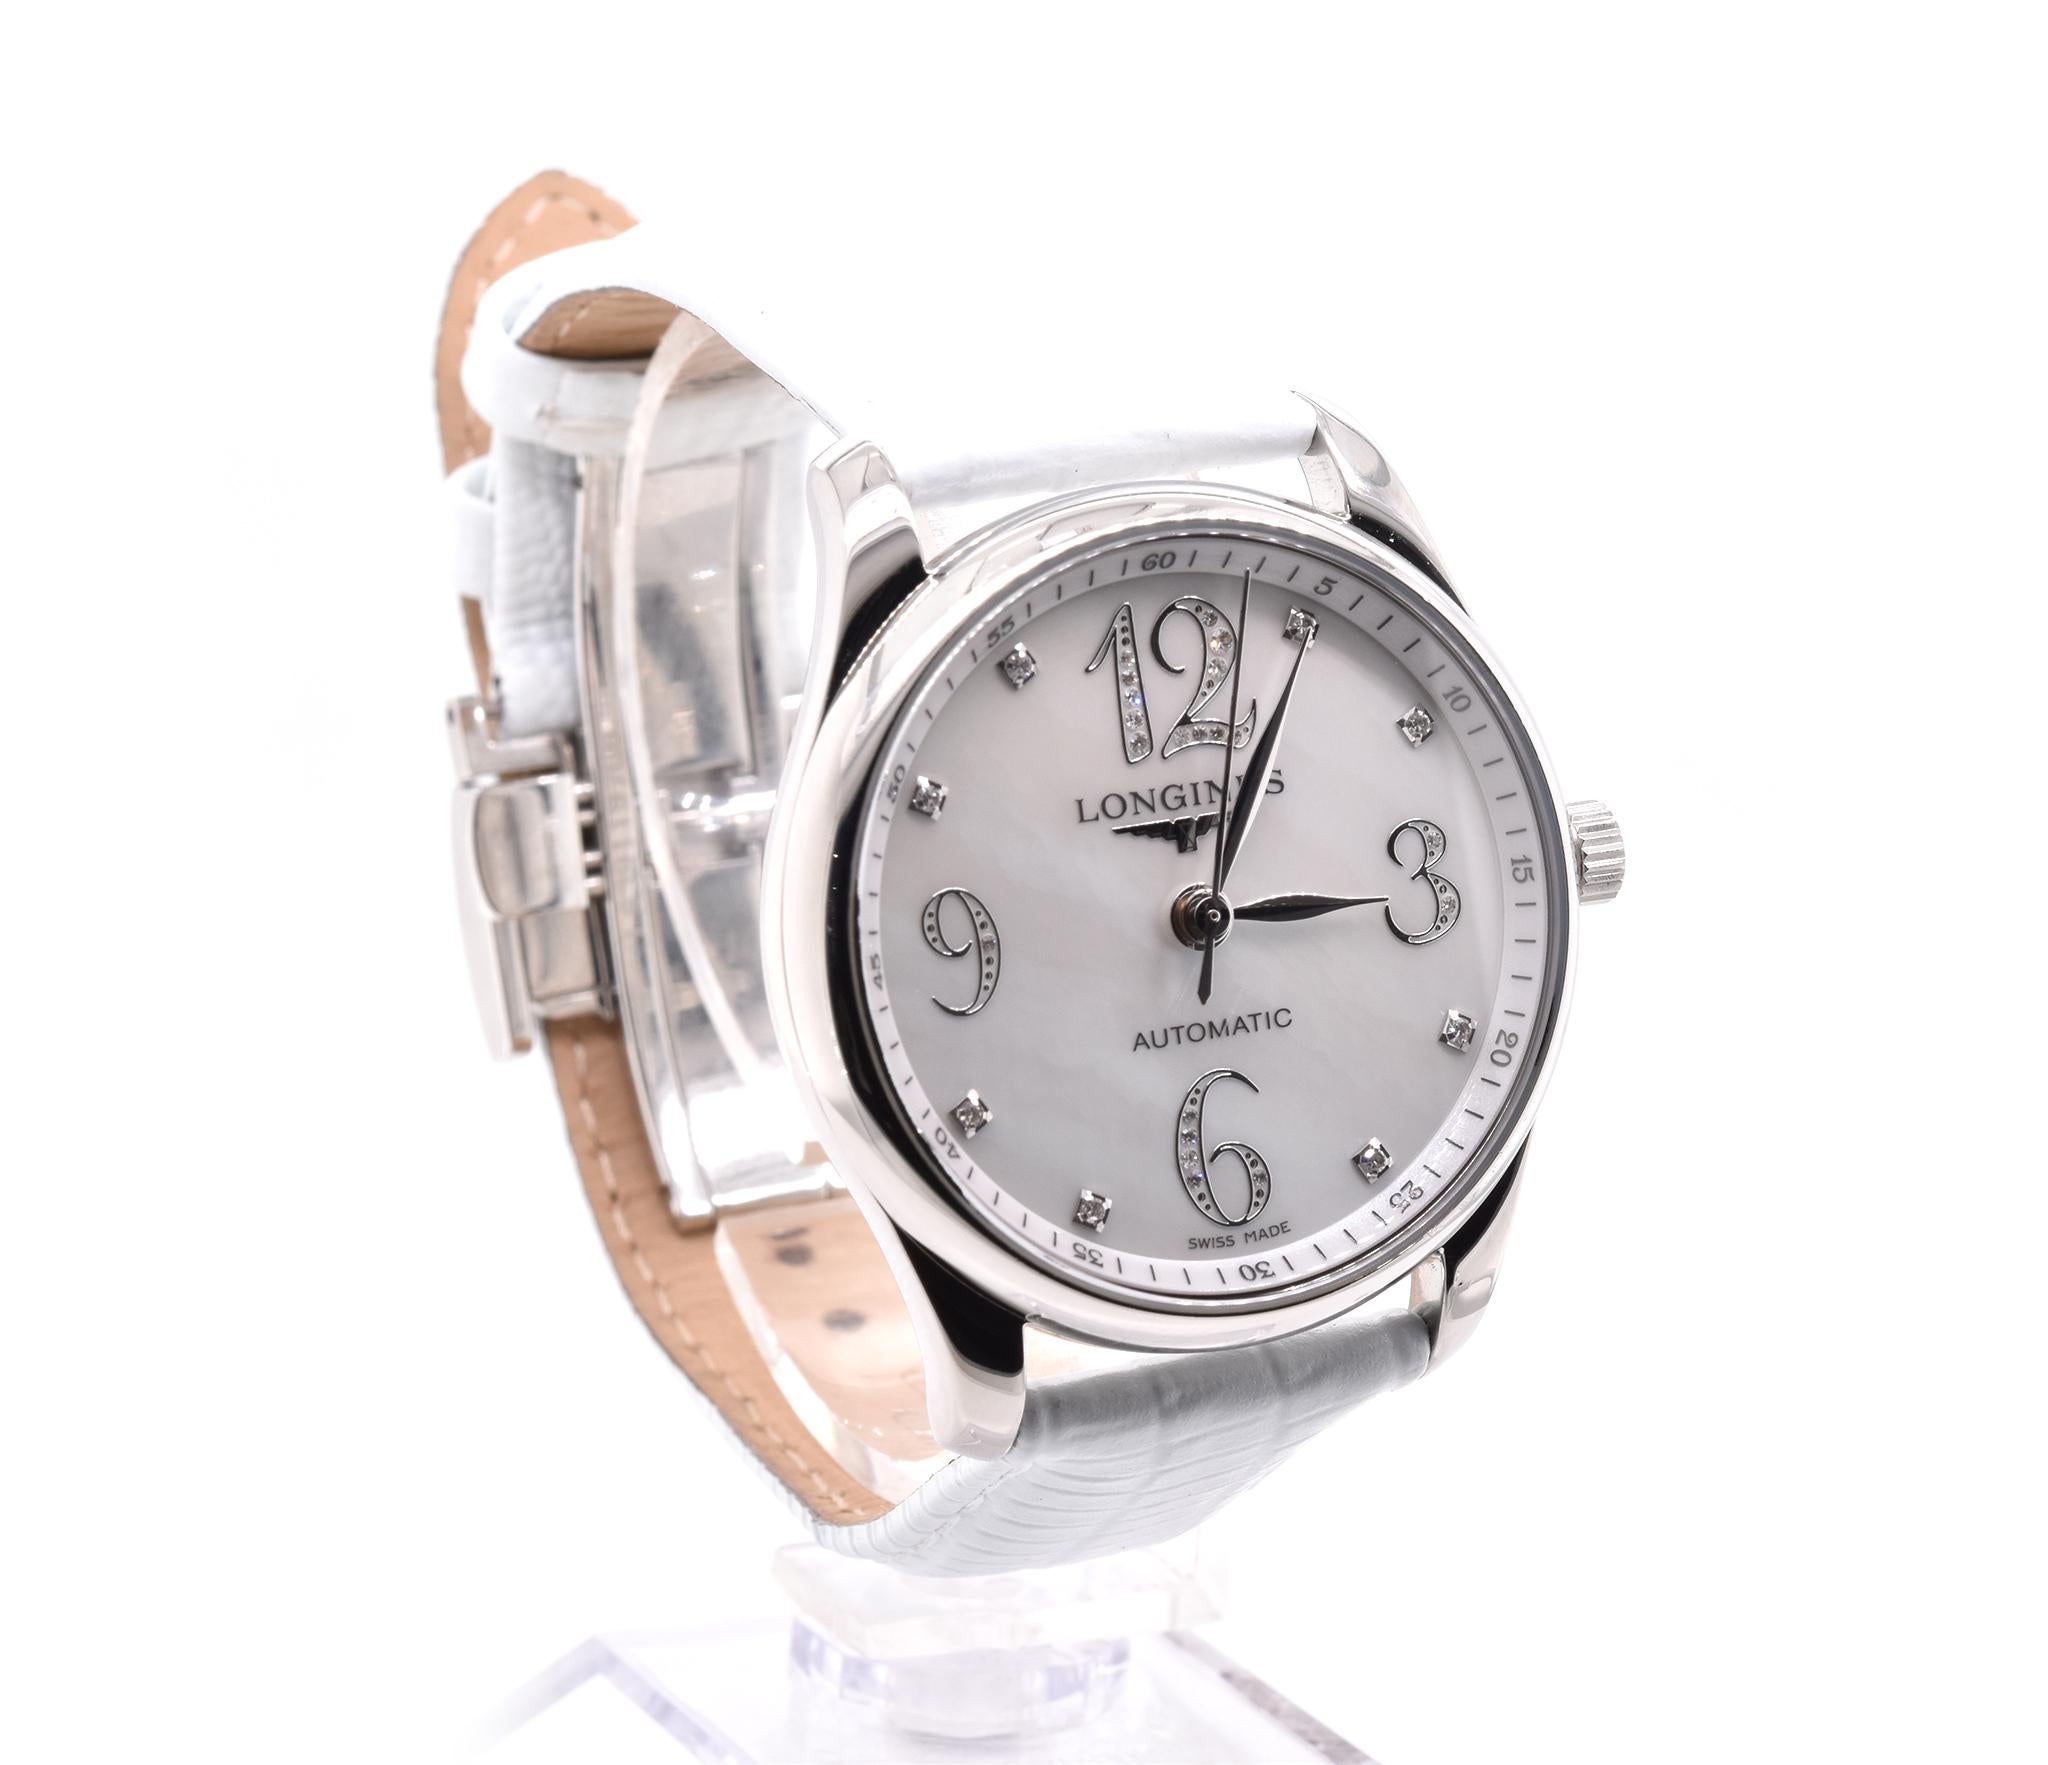 Brand: Longines
Movement: automatic
Function: hours, minutes, seconds
Case: 36mm case, smooth bezel, sapphire crystal
Dial: mother-of-pearl diamond dial
Band: generic white lizard strap with factory Longines buckle, will fit up to a 7-inch